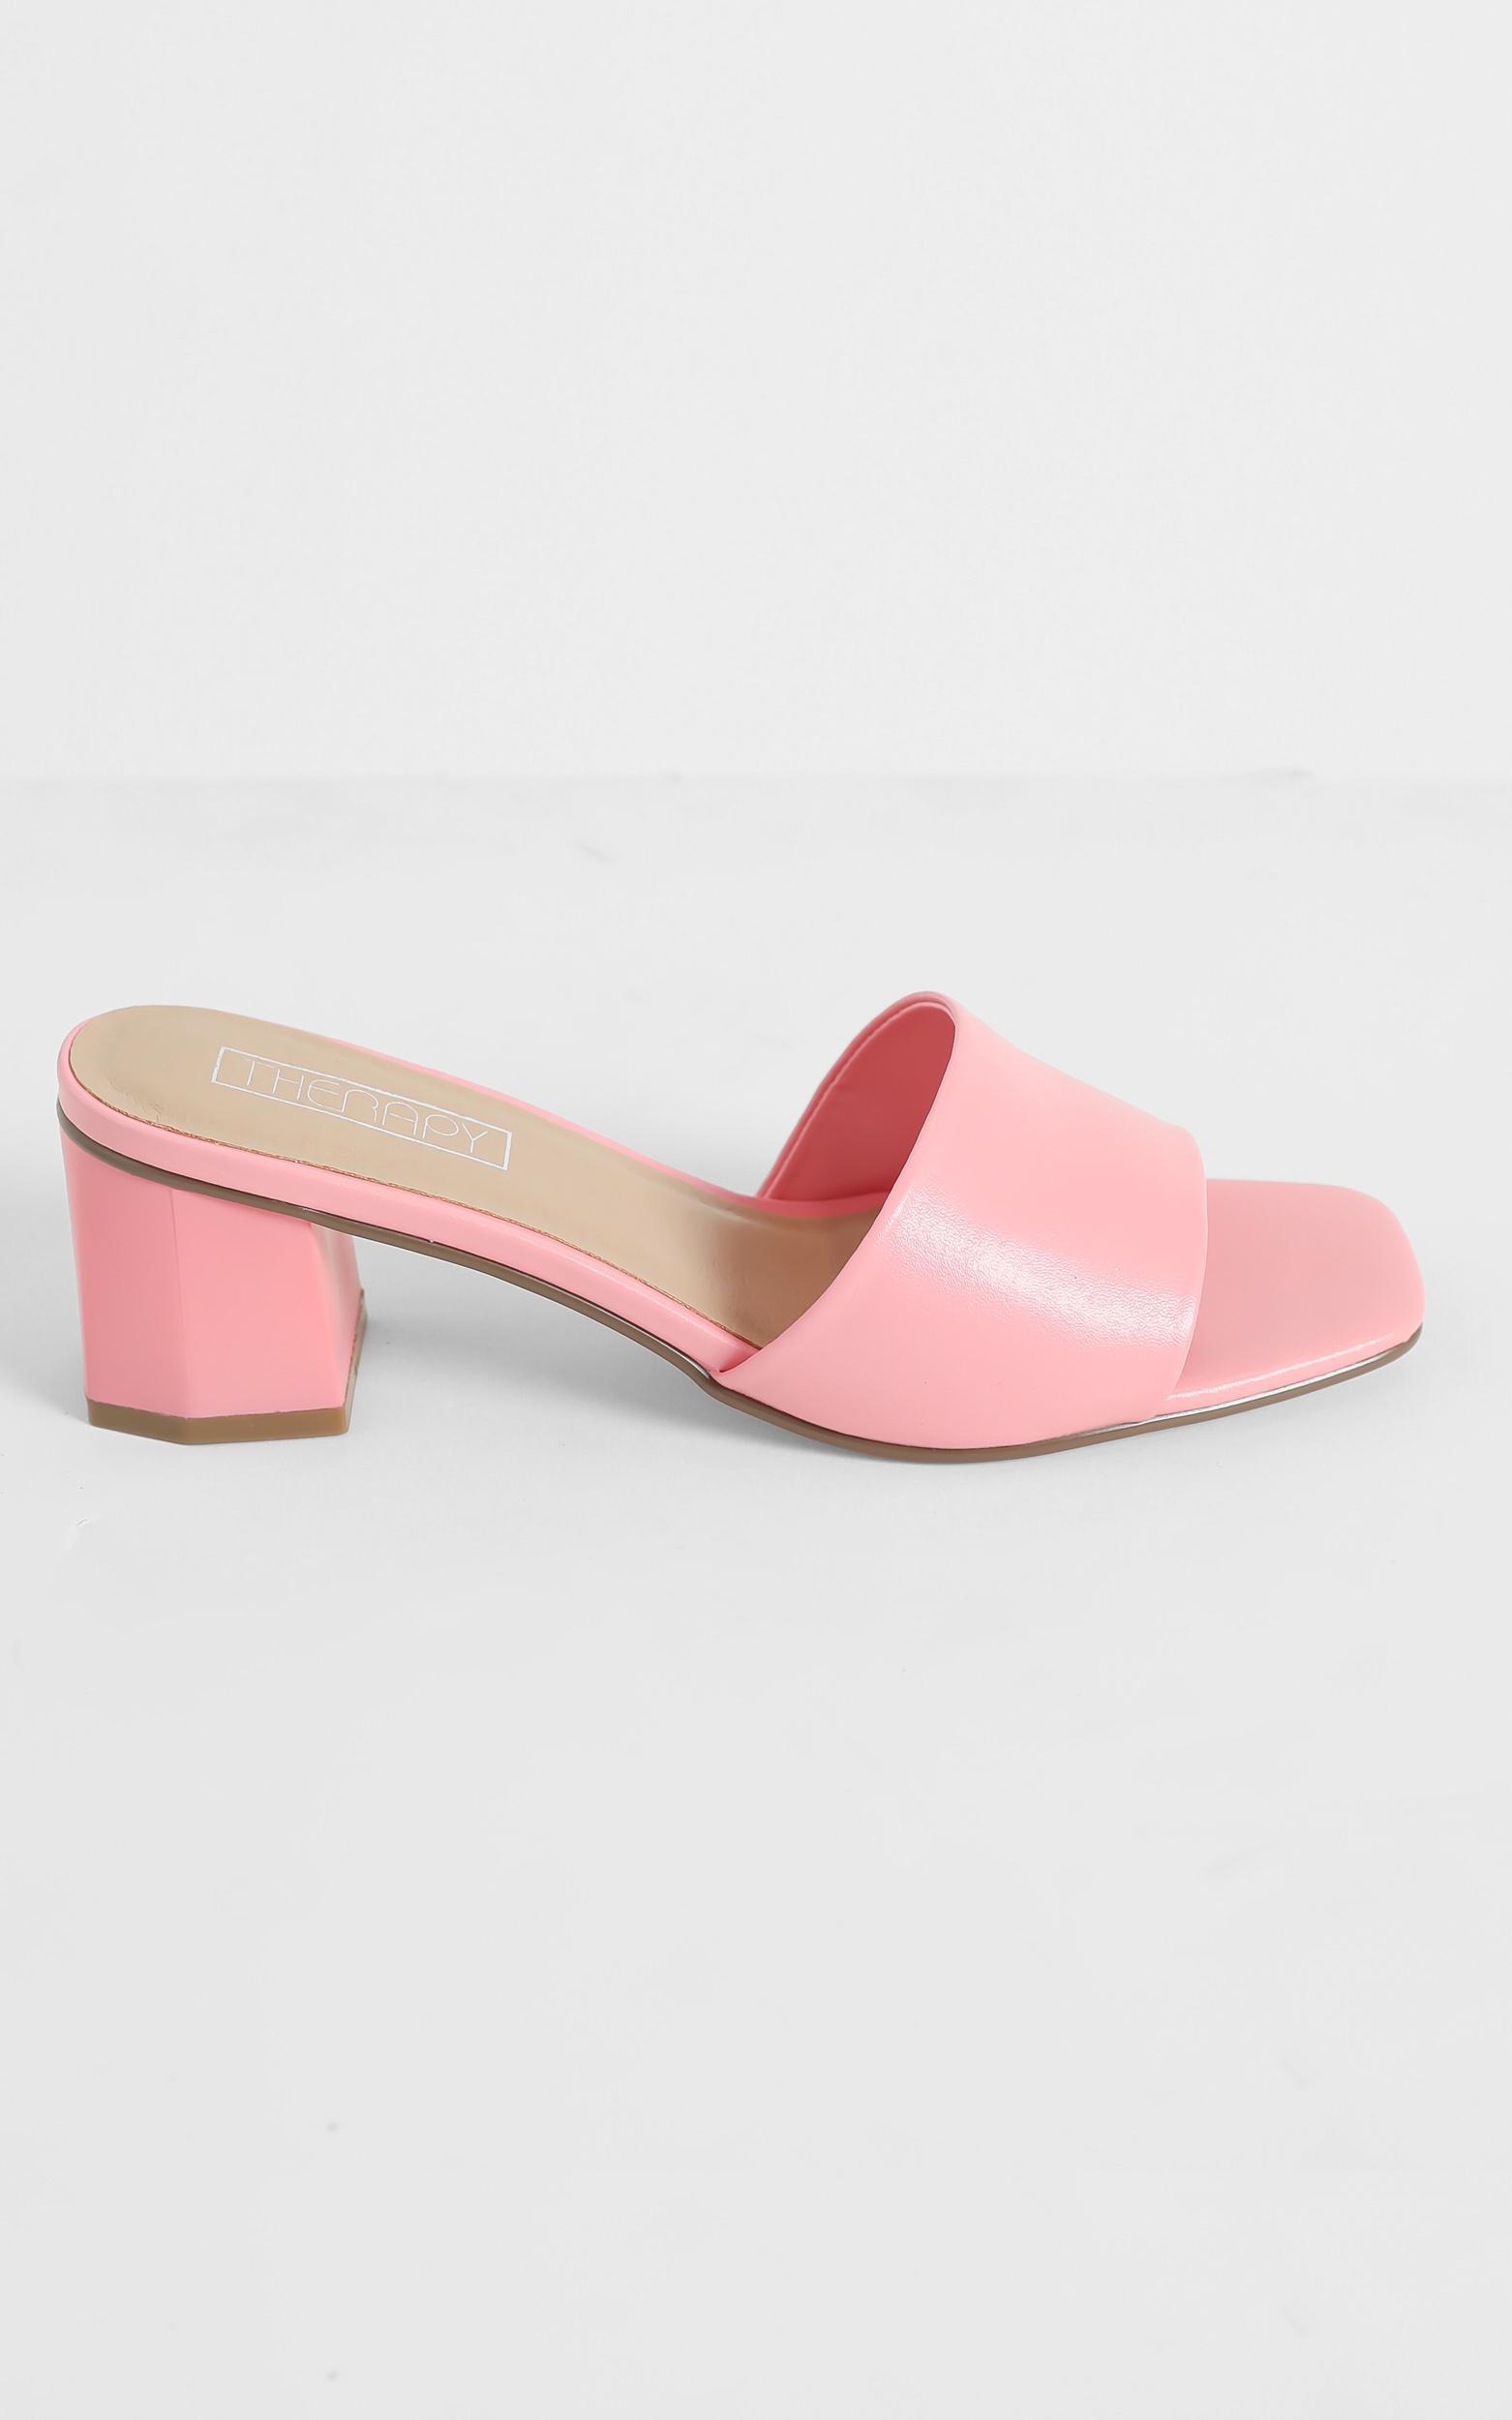 Therapy - Nyla Heels in Pink - 05, PNK2, hi-res image number null